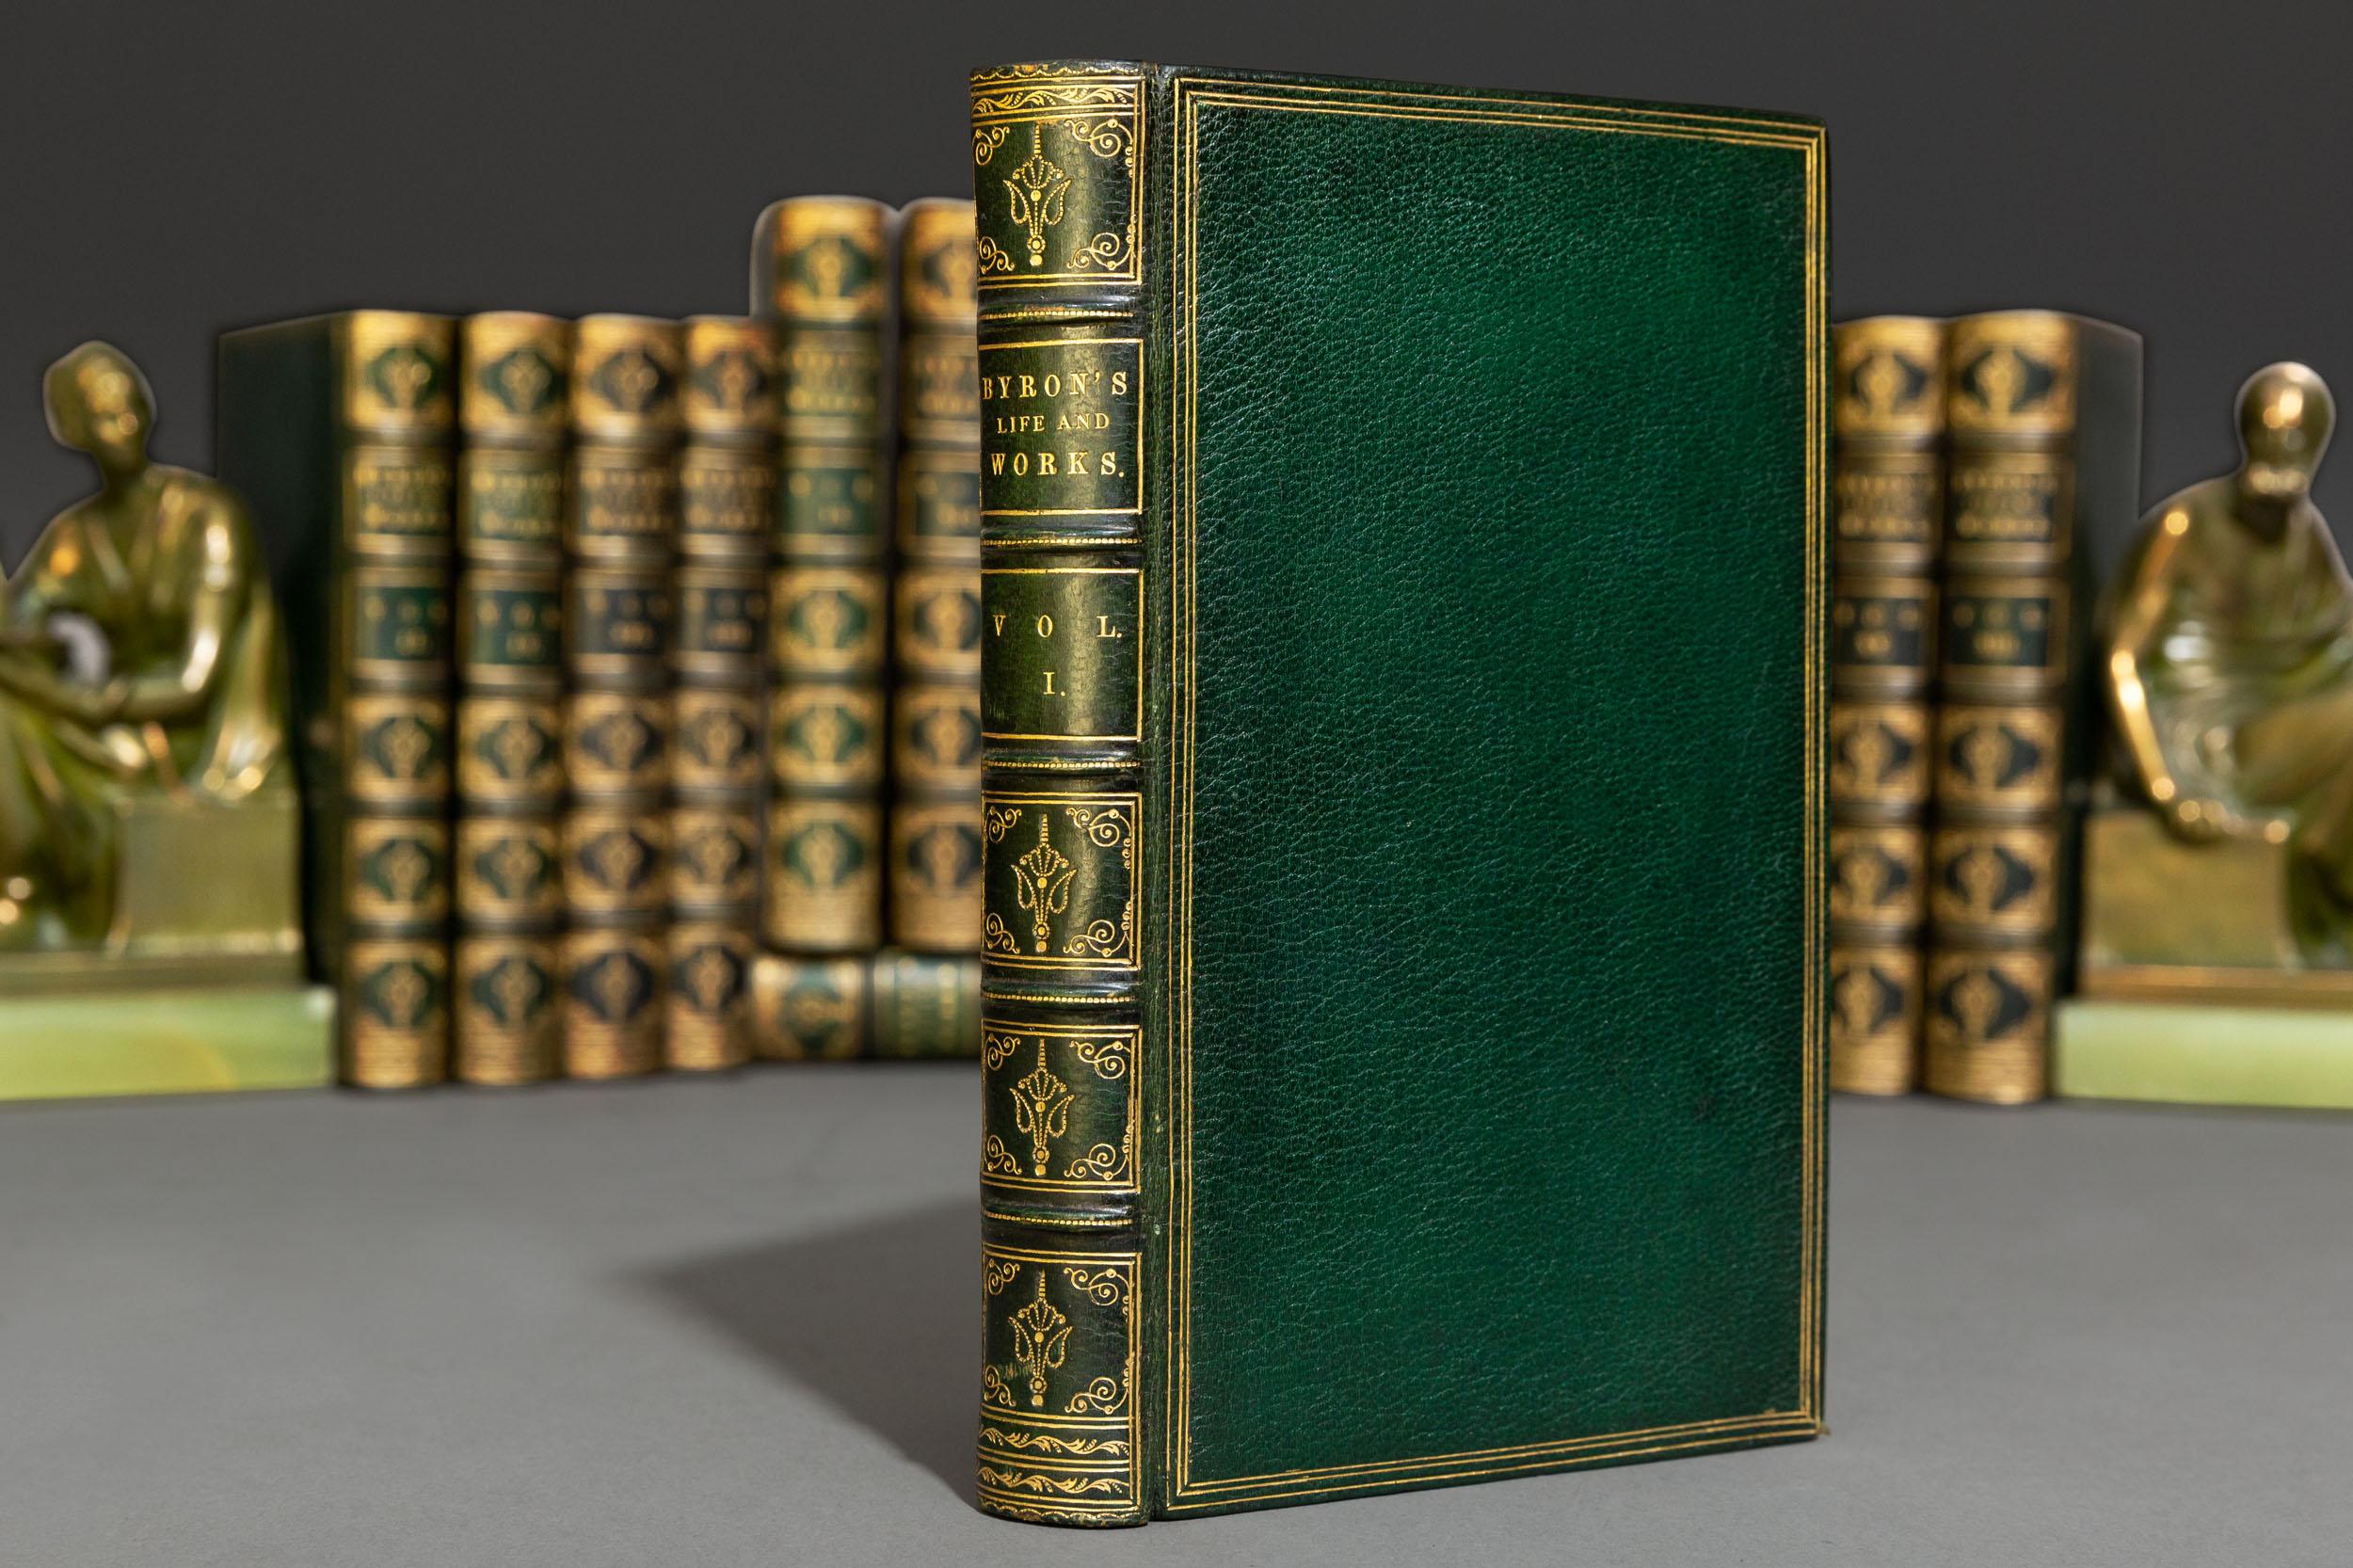 (Book Sets) 17 Volumes. Lord Byron. Works. With His Letters, Journals & His Life by Thomas Moore, Esq.
Bound in full green morocco, all edges gilt, raised bands, gilt panels, Illustrated. Published: London:
John Murray 1833. Fine set.